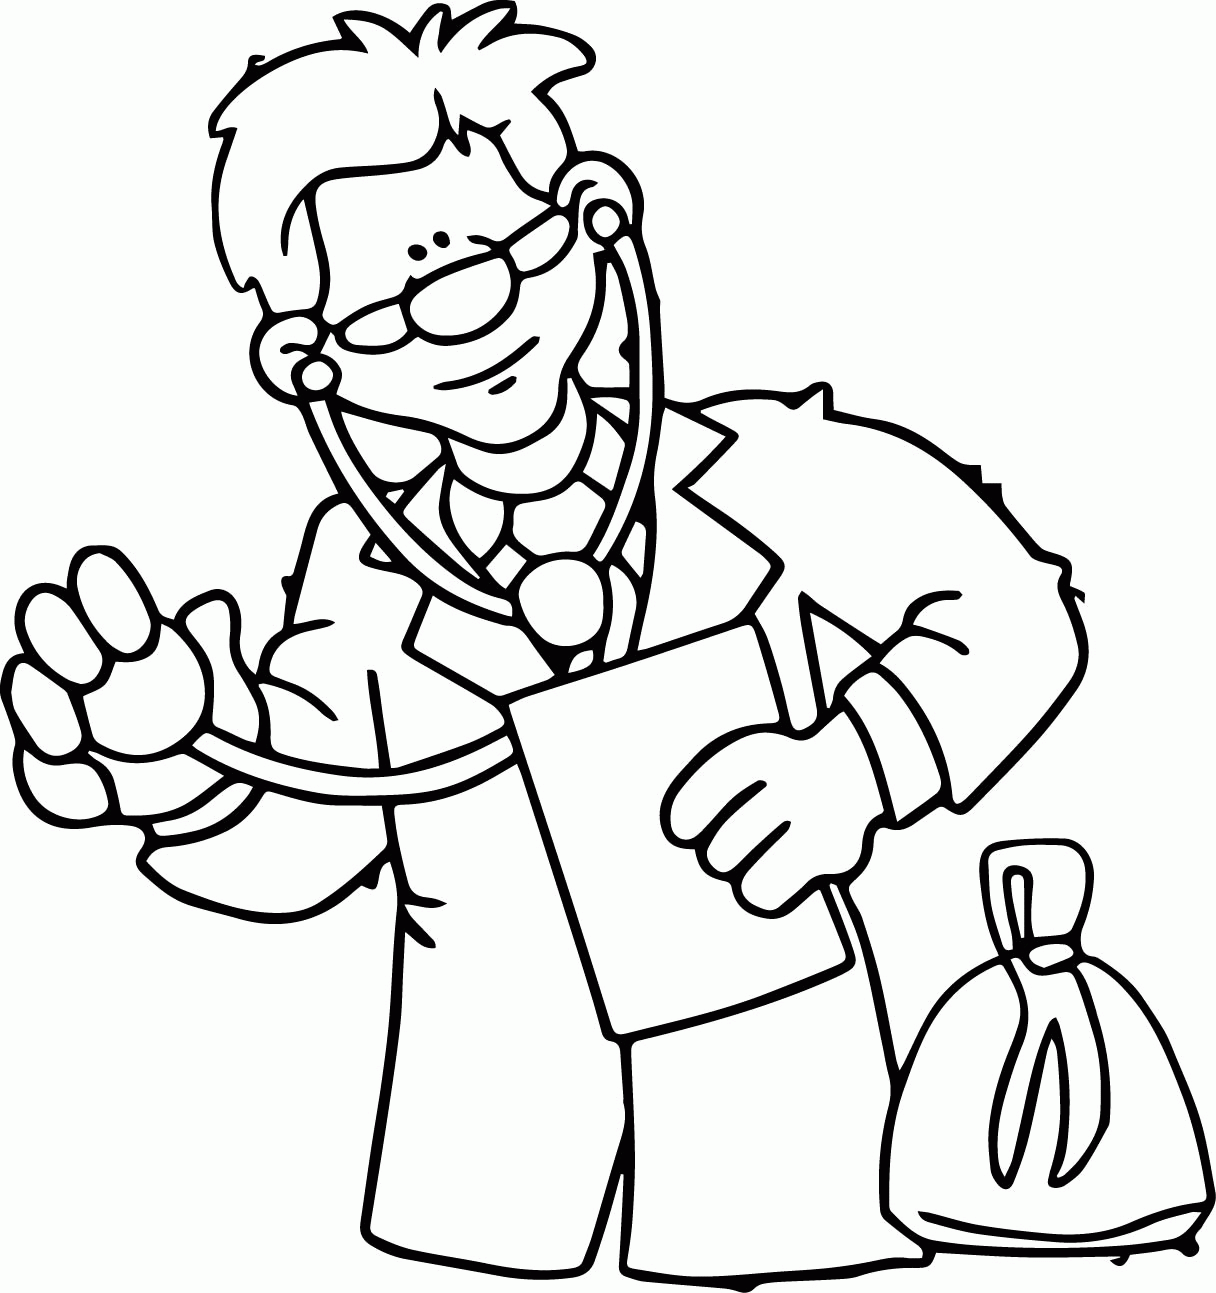 A Doctor Coloring Page Printable Sheets Free Occupations Doctor Page 2021 a 0240 Coloring4free